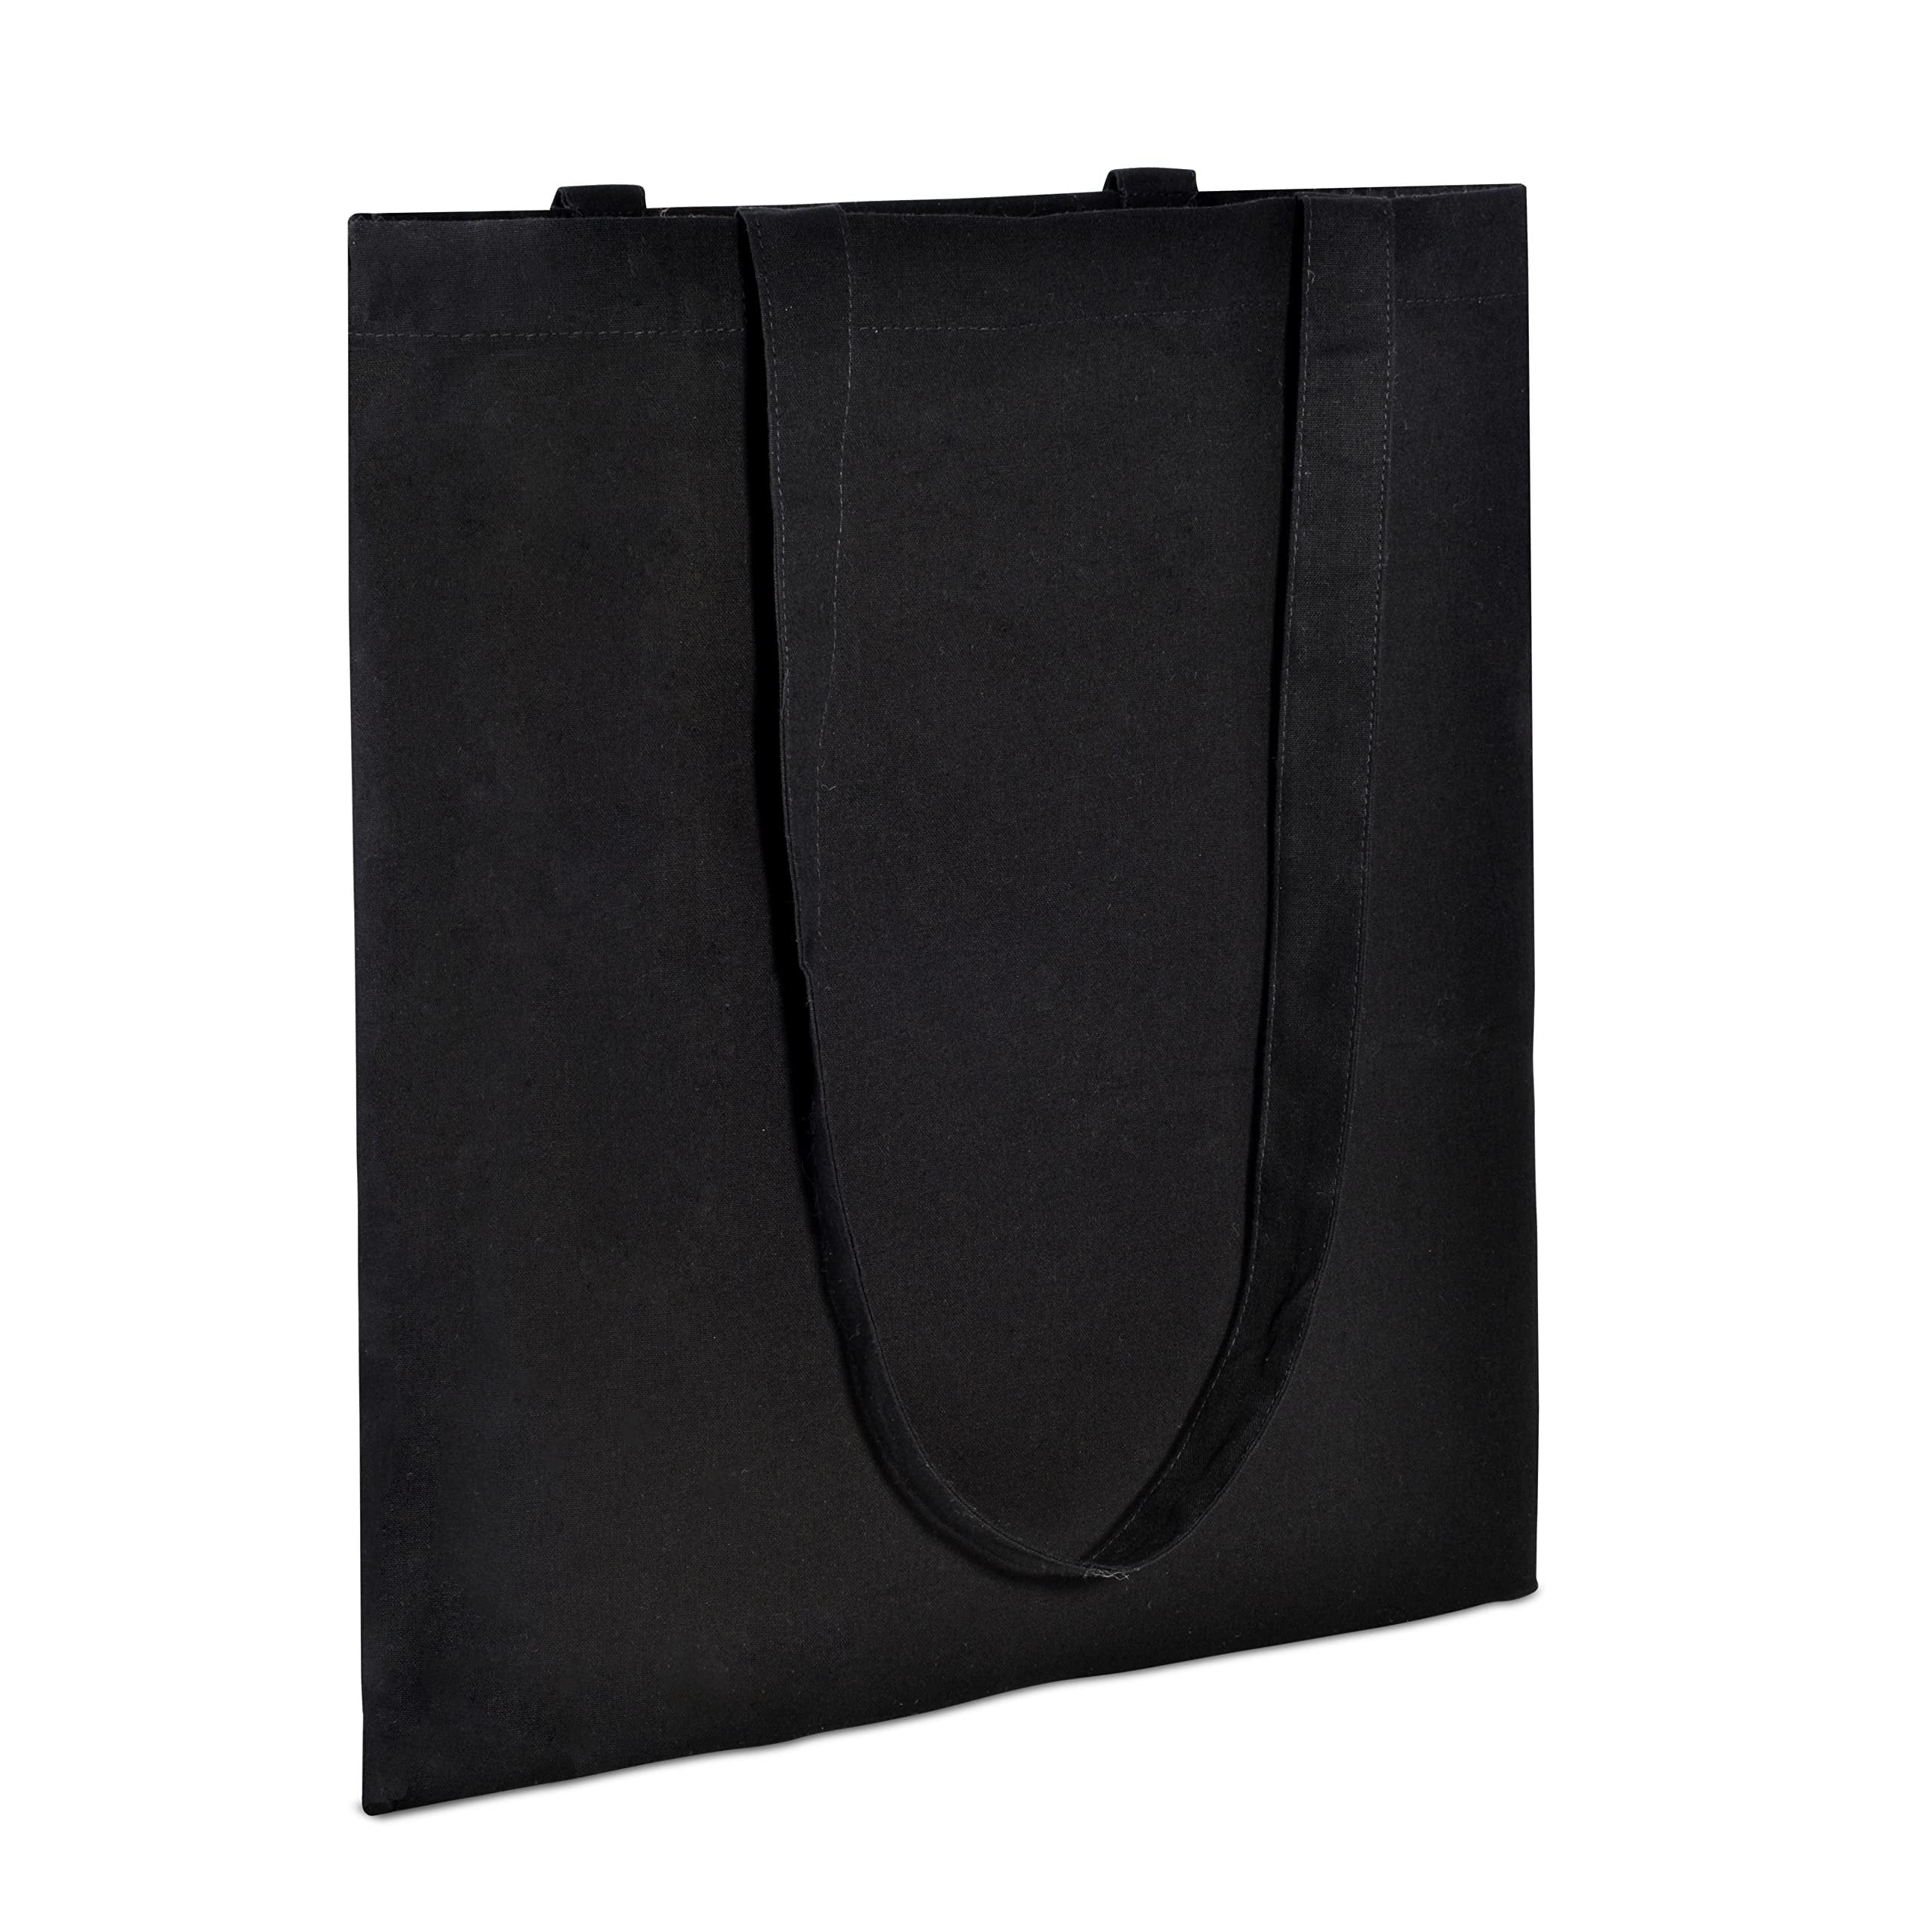 Canvas Tote Bags Bulk - 12 Pack Black Cotton Shopping Bags with Shoulder Length Handles, Small Reusable Natural Organic Muslin Fabric Cloth, Blanks For Sublimation, Stores, Business, Crafts - 15x16